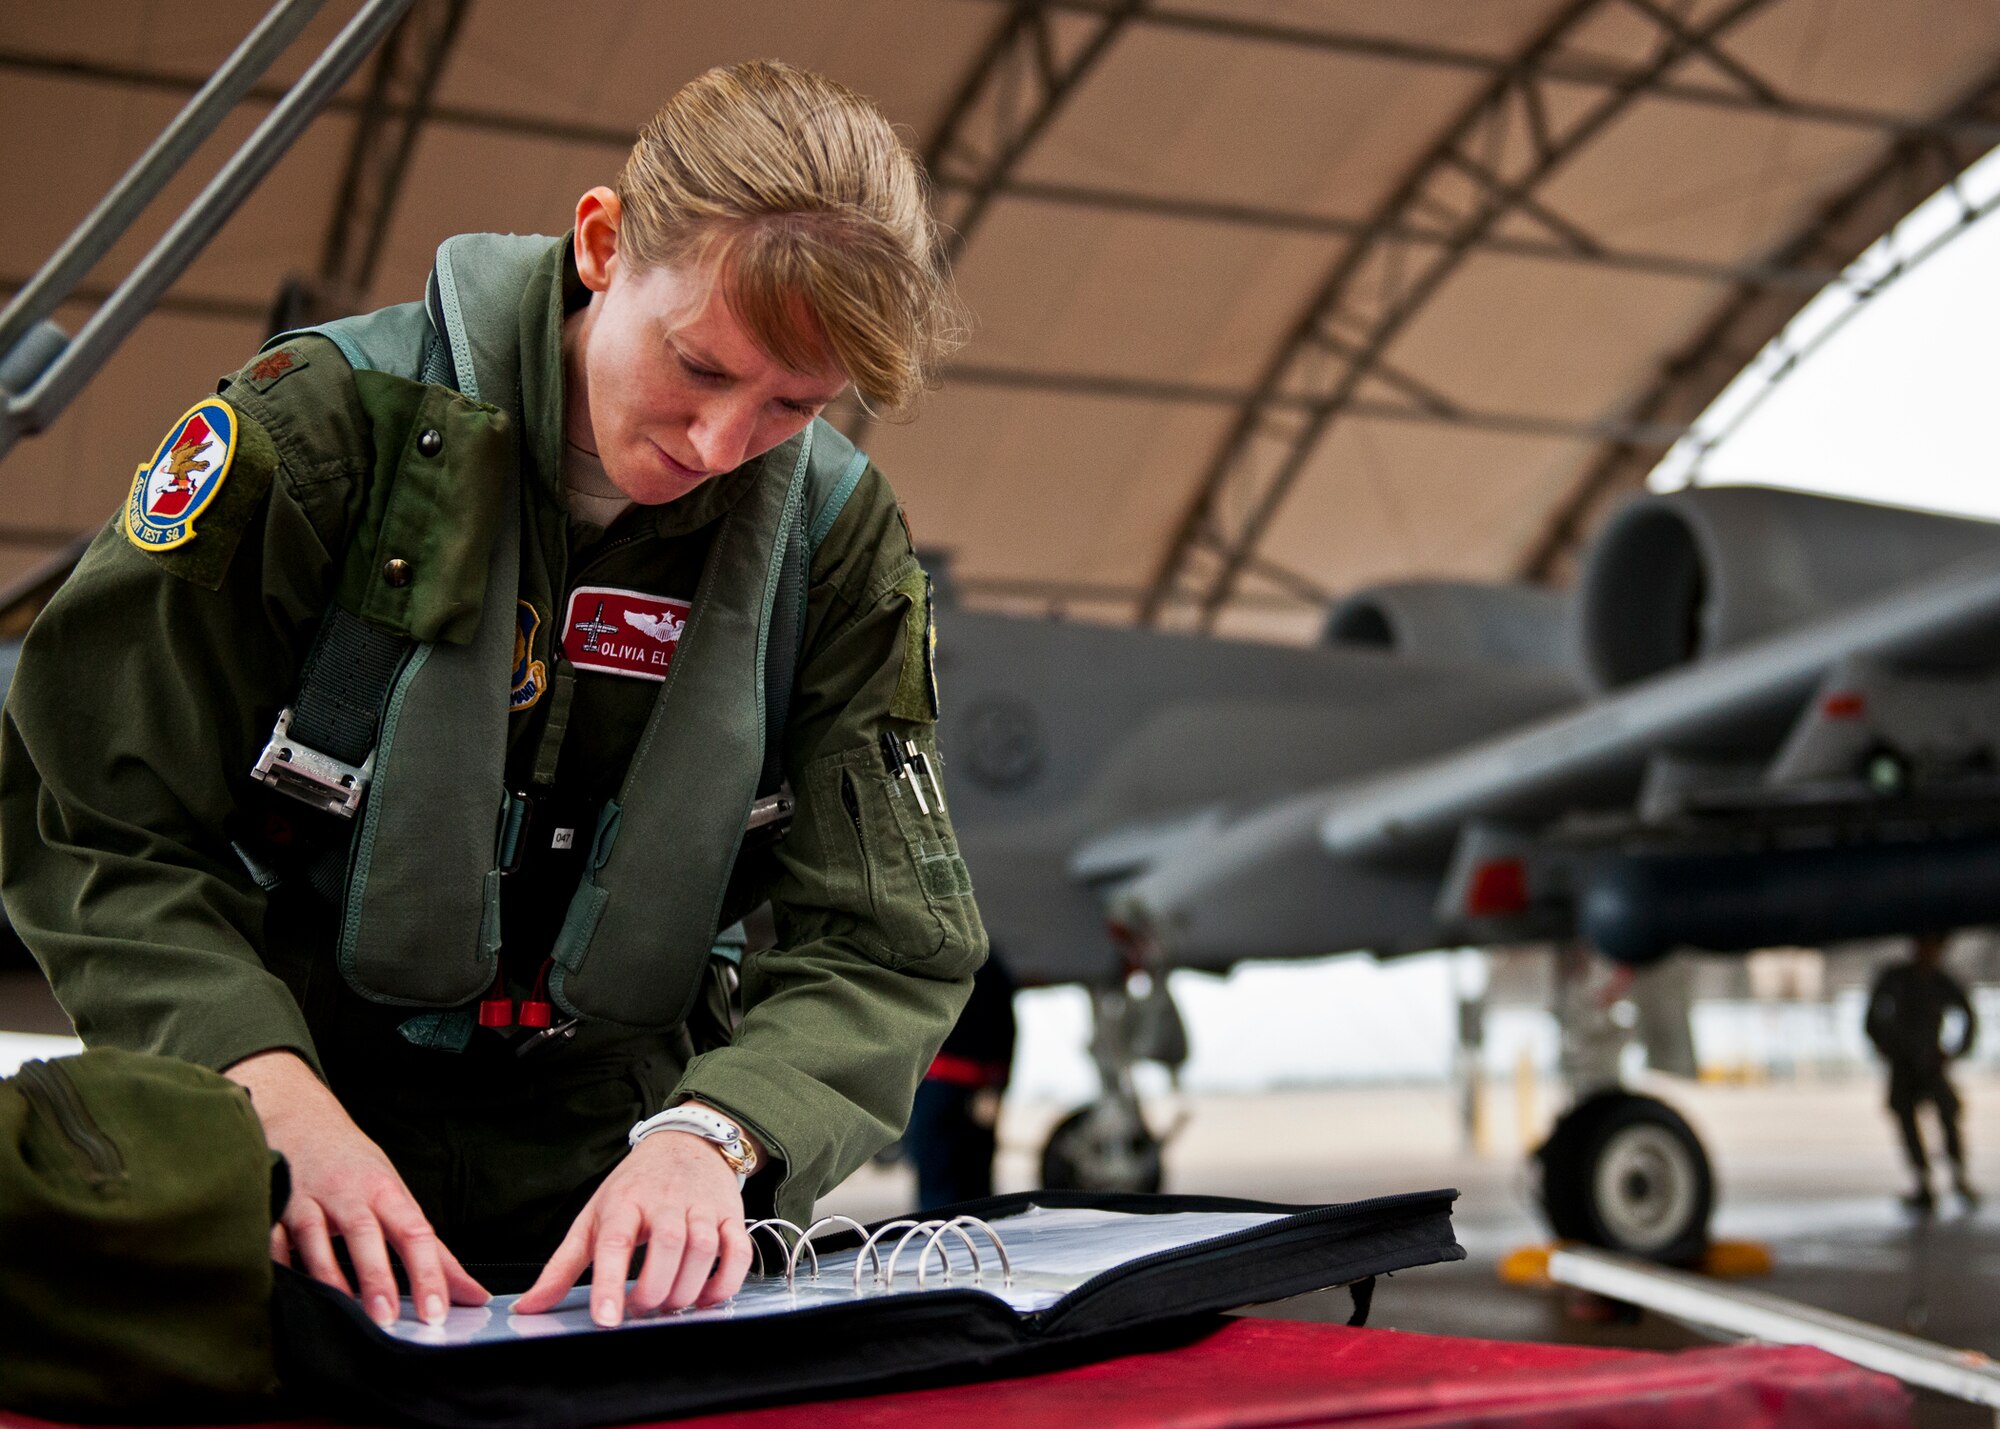 Maj. Olivia Elliott, of the 40th Flight Test Squadron, examines the logbook for her A-10 Thunderbolt II prior to a test mission Jan. 10 at Eglin Air Force Base, Fla.  Her mission was to wrap up flight testing of the new Net-T software upgrade on the LITENING II advanced targeting pod.  The new upgrade allows the pod to provide ground forces beyond-line-of-sight command and control capabilities as long as the aircraft is within range.  This is the first-ever test of this new capability.   (U.S. Air Force photo/Samuel King Jr.)